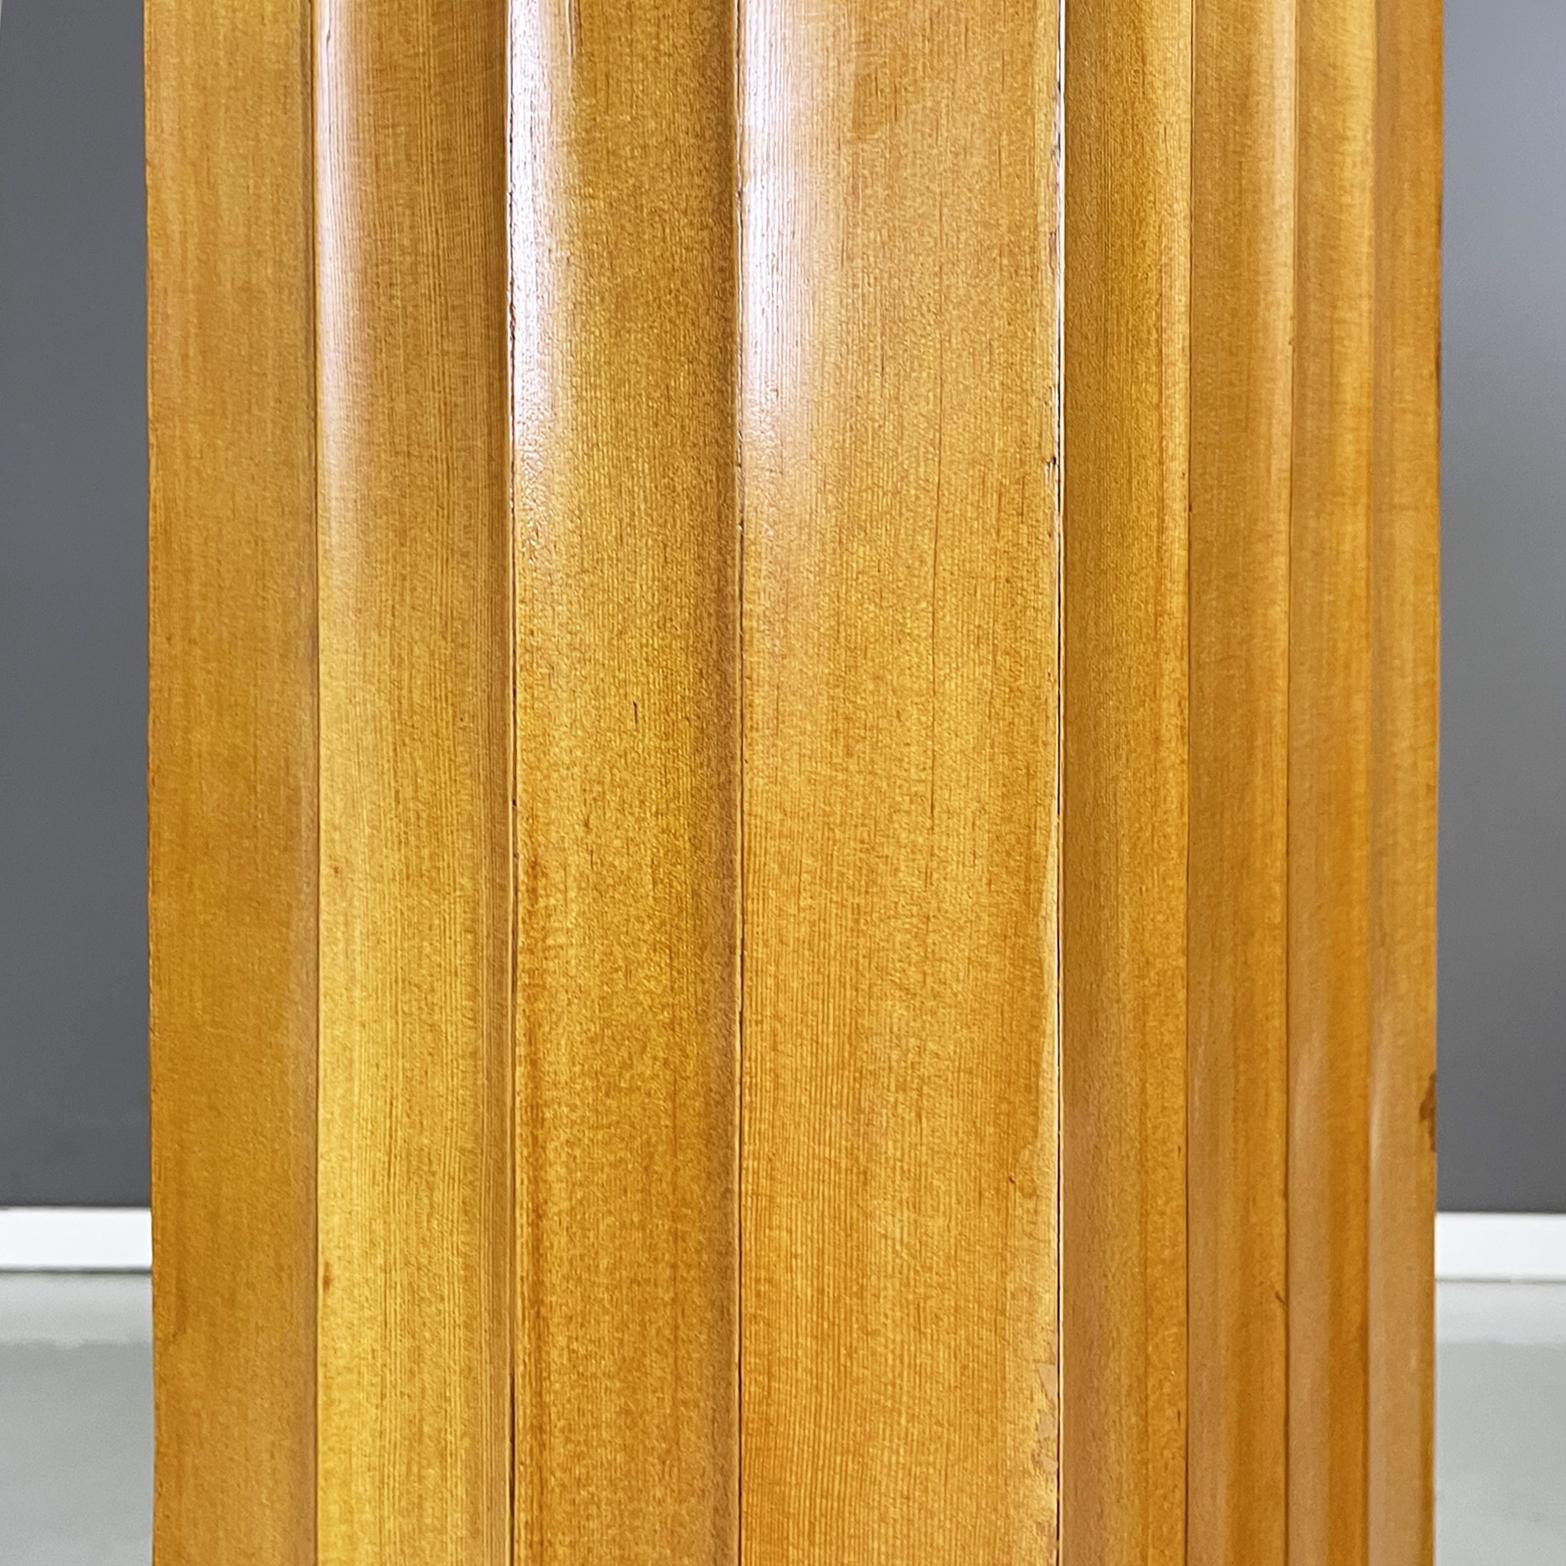 Italian Midcentury Black Light Wooden Square Pedestals with Wavy Profile, 1960s For Sale 5